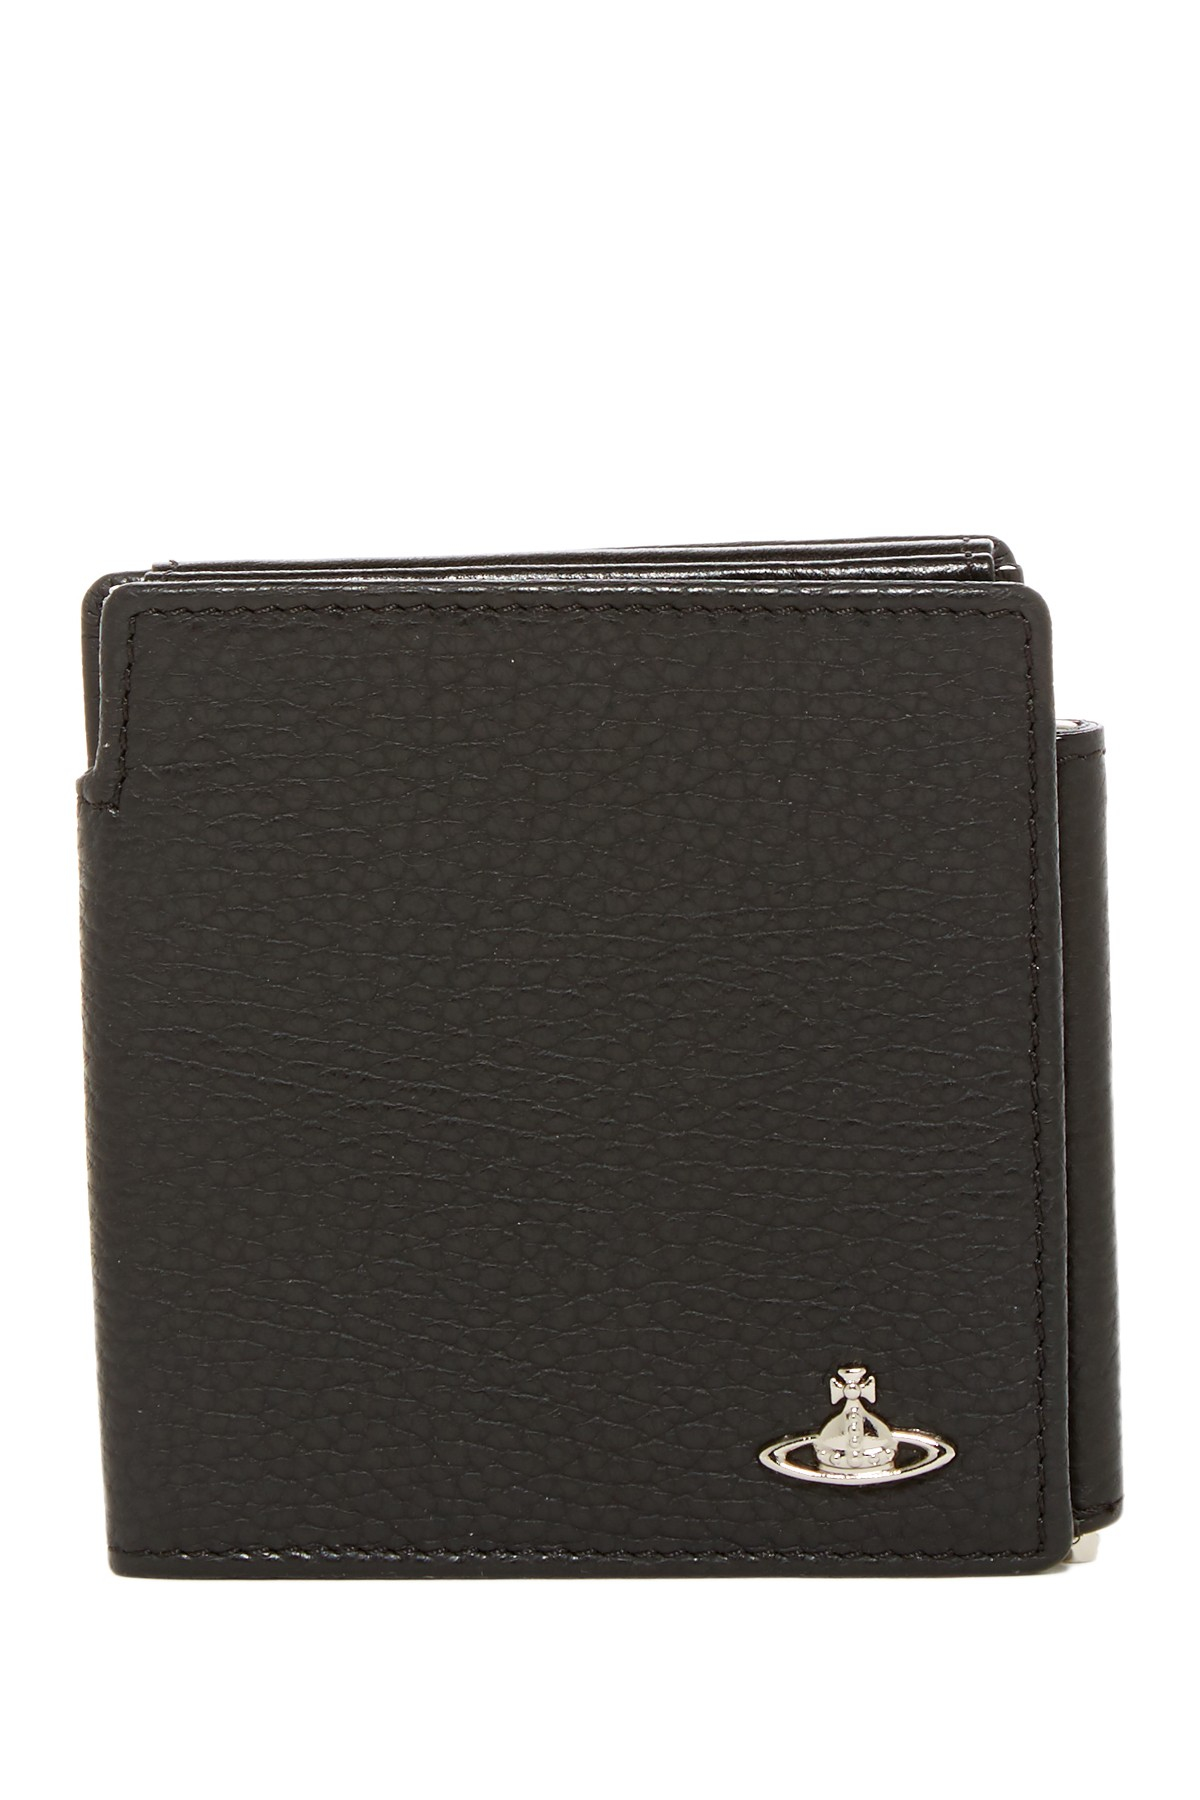 Vivienne westwood Leather Trifold Wallet in Black for Men - Save 54% | Lyst